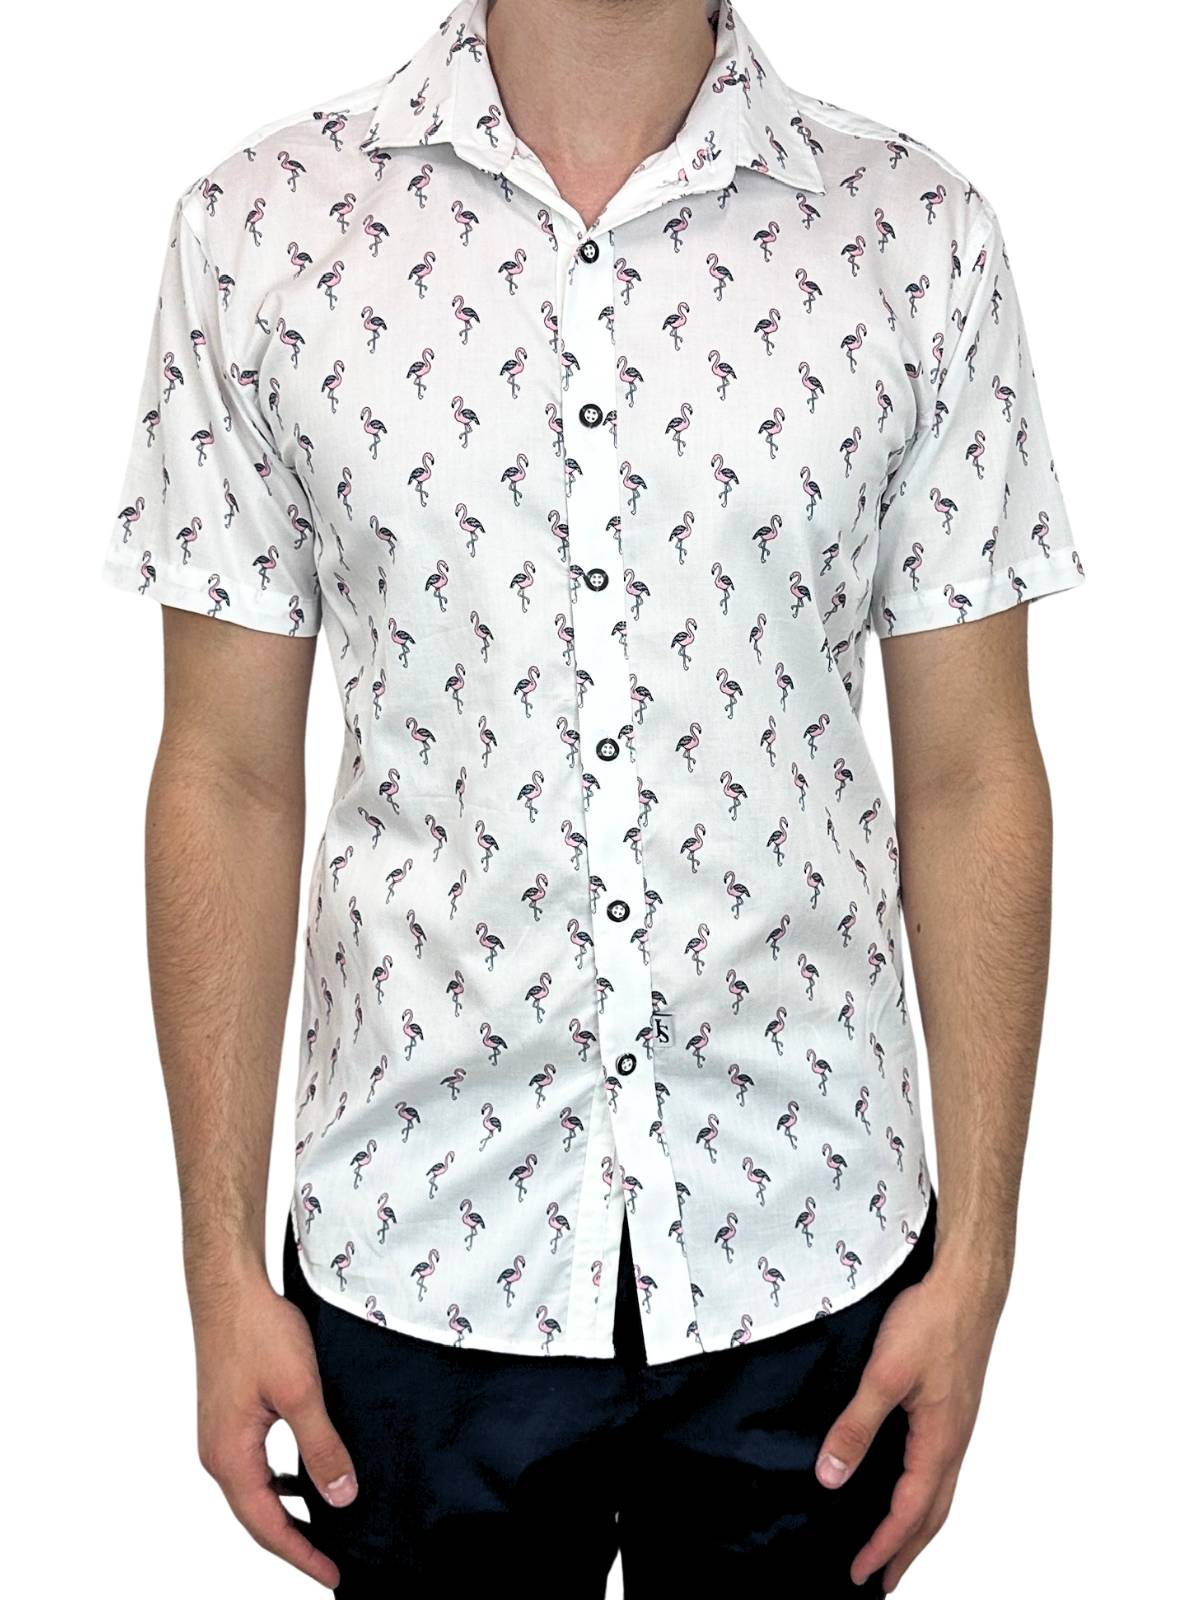 Legs Abstract Cotton S/S Shirt